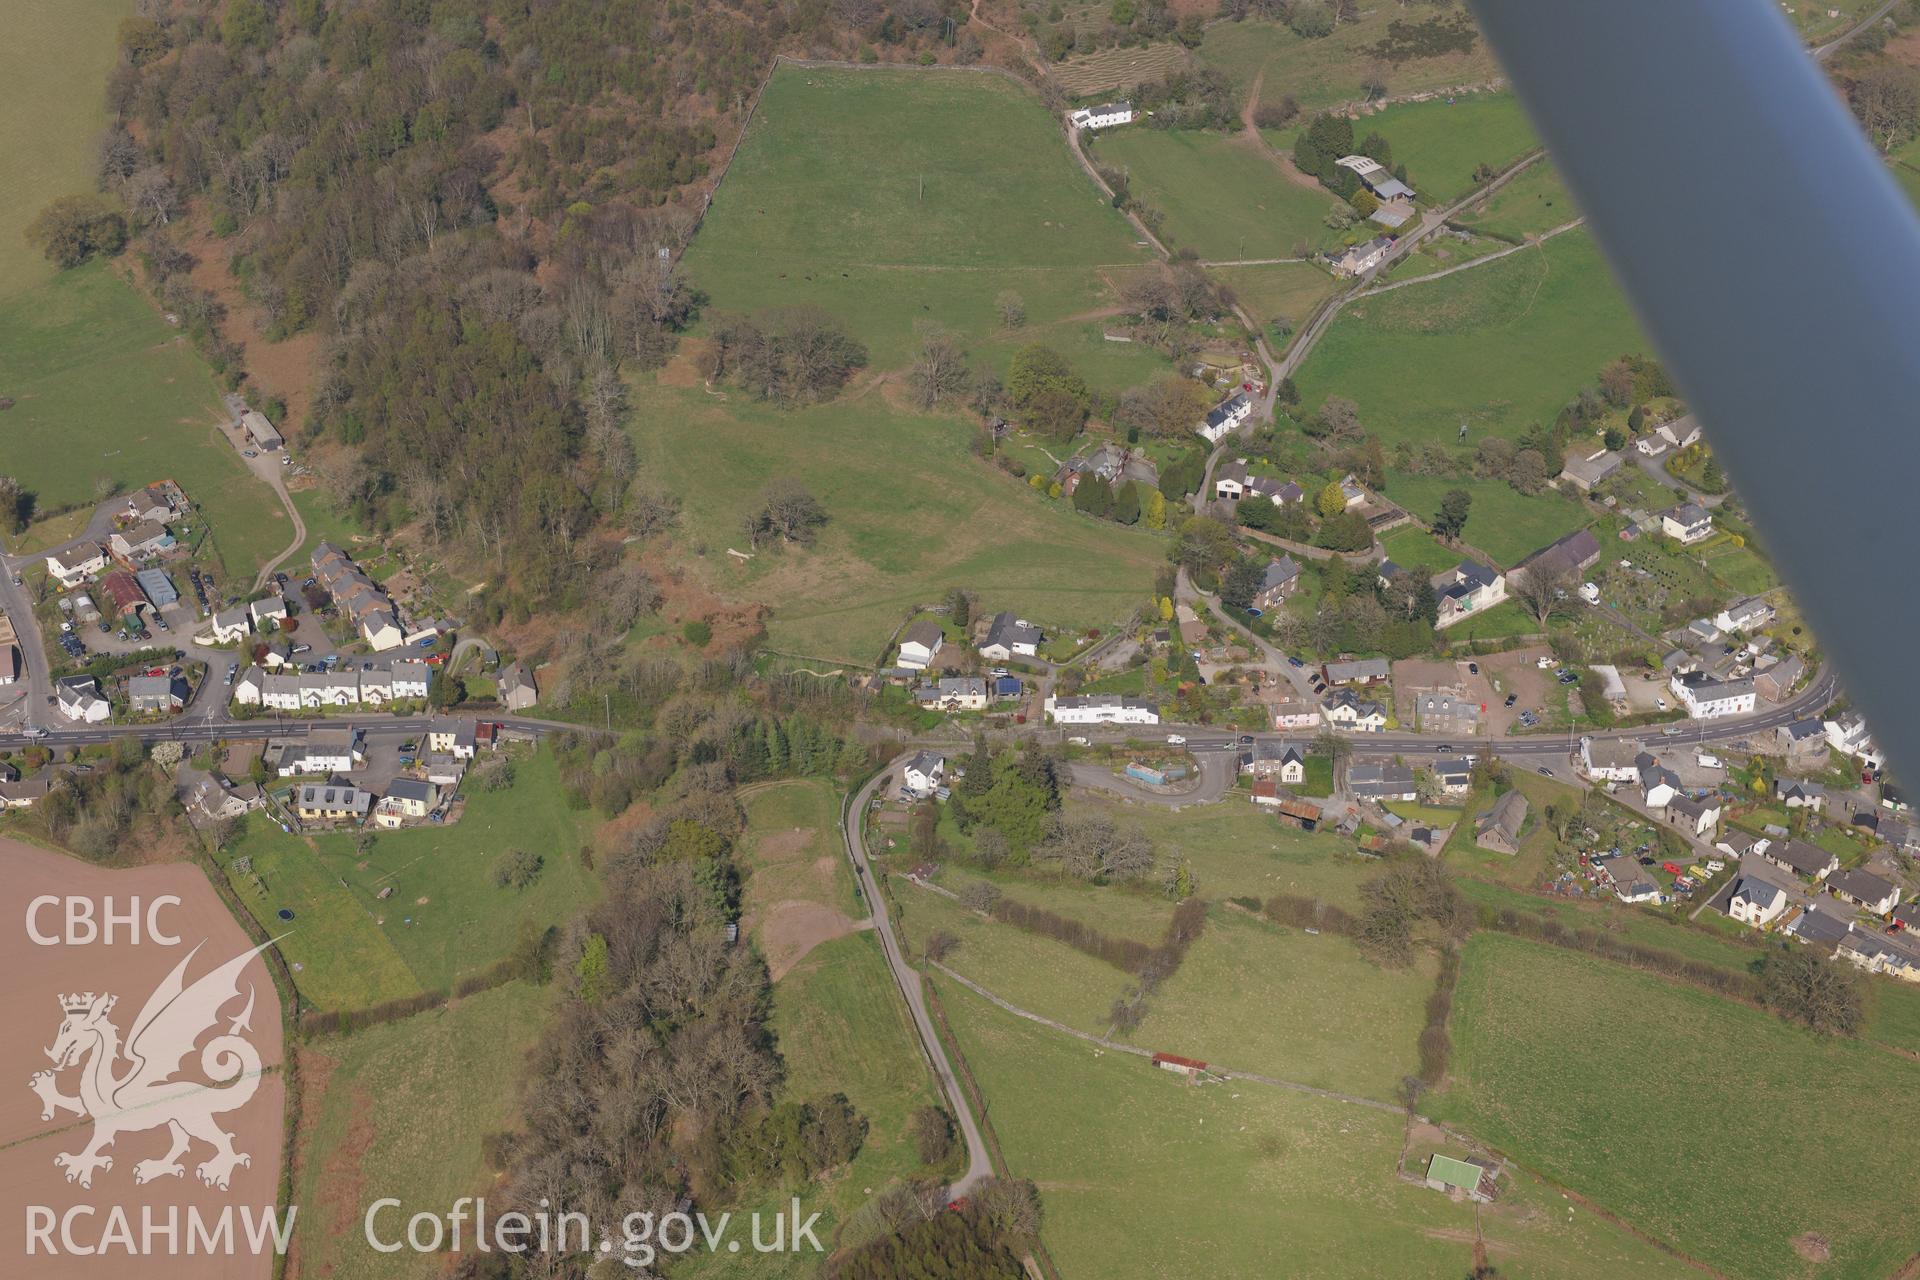 Bwlch including views of All Saint's Church and Penuel Chapel. Oblique aerial photograph taken during the Royal Commission's programme of archaeological aerial reconnaissance by Toby Driver on 21st April 2015.